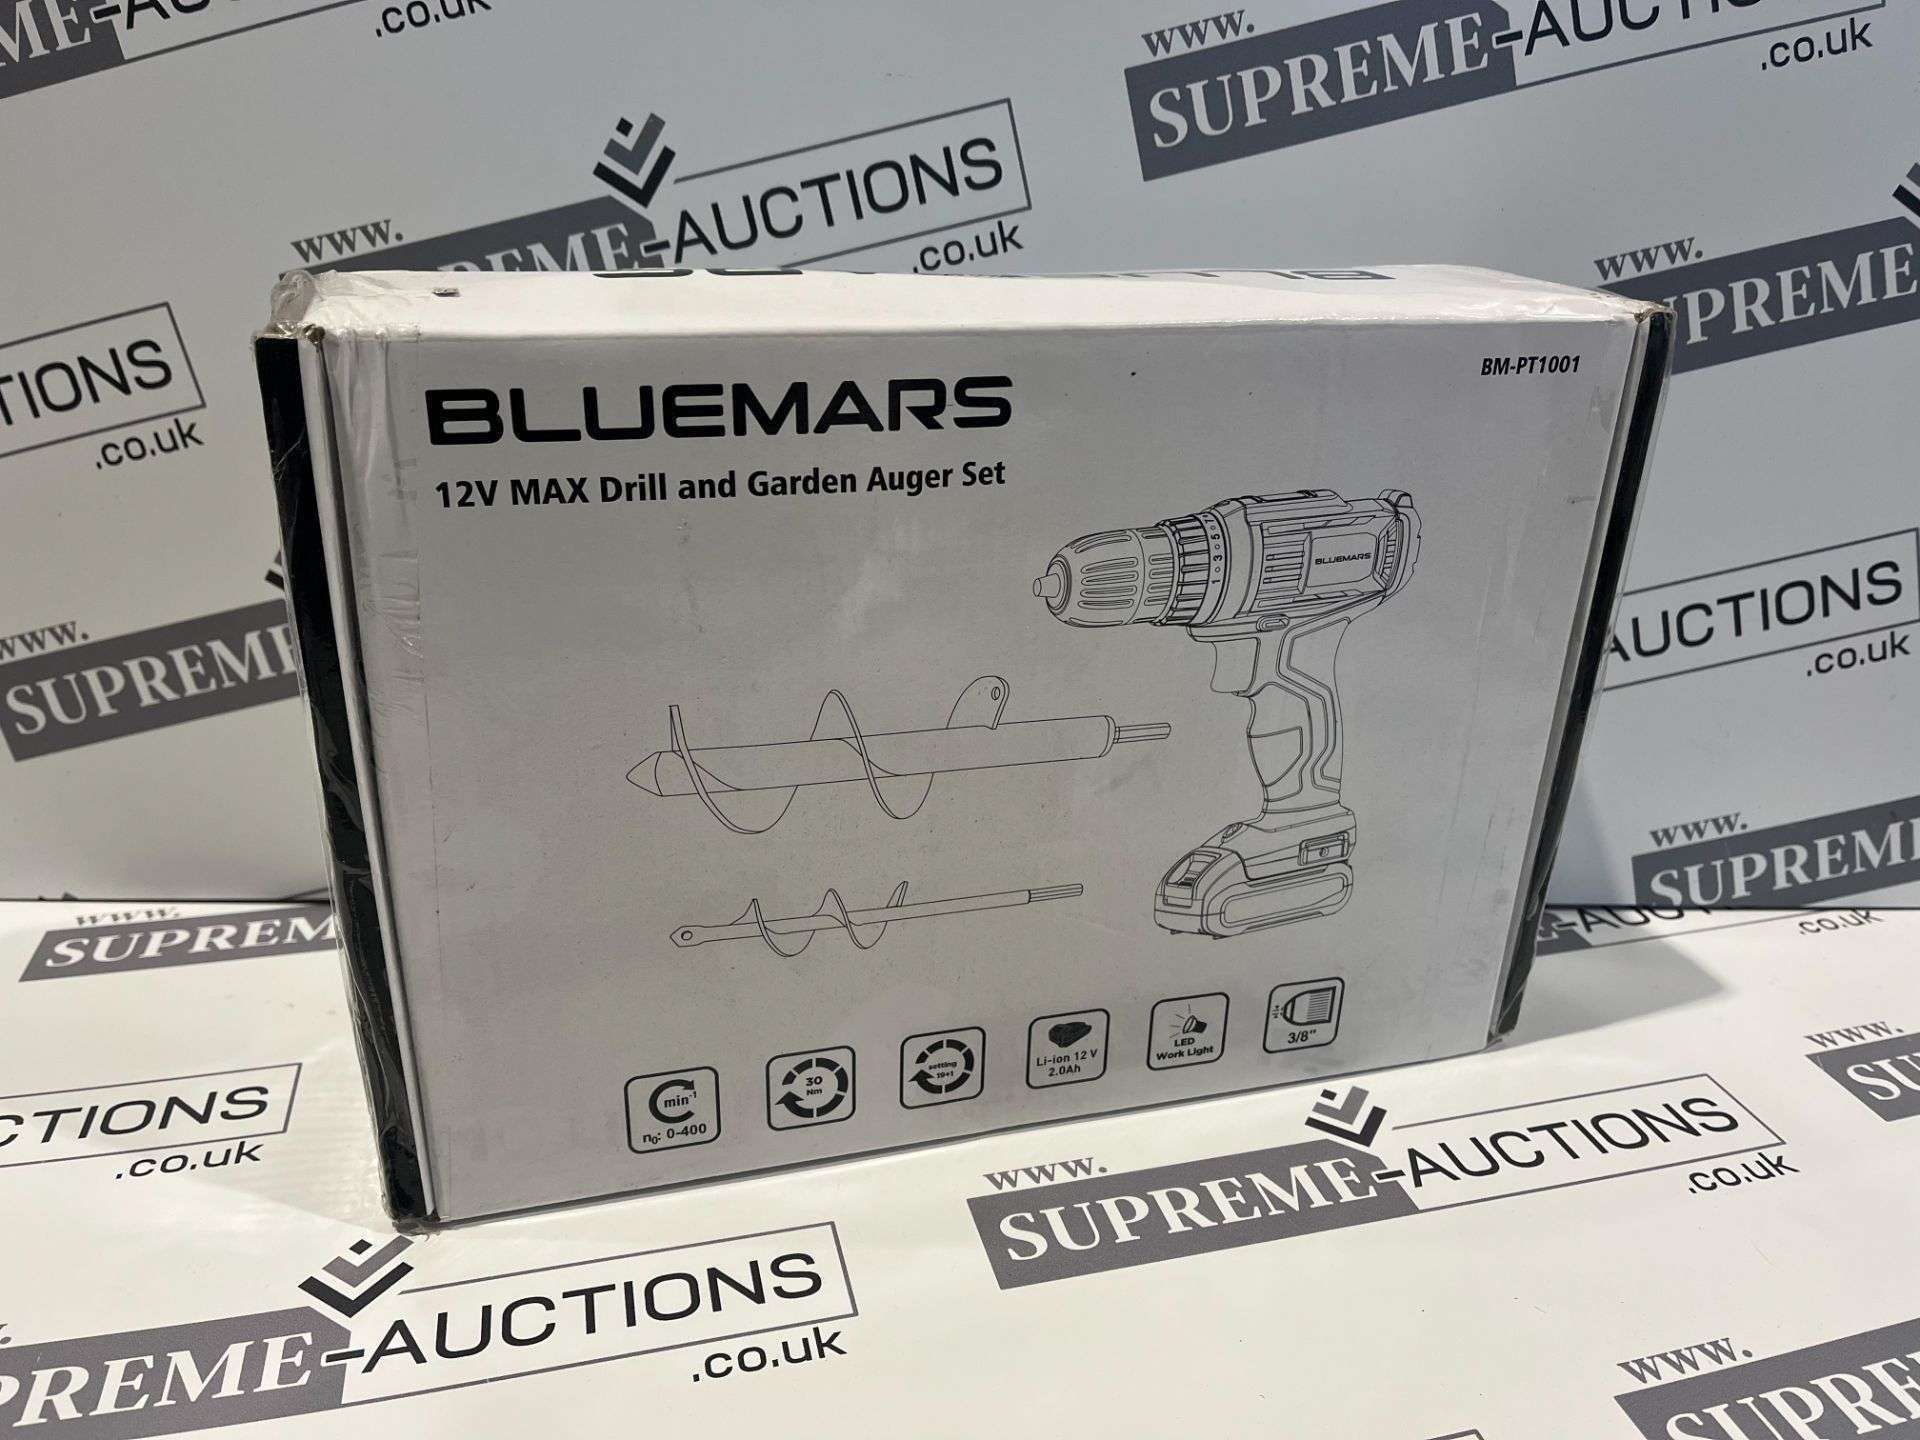 NEW & BOXED BLUEMARS 12V MAX DRILL AND GARDEN AUGER SETS. (S1RA)